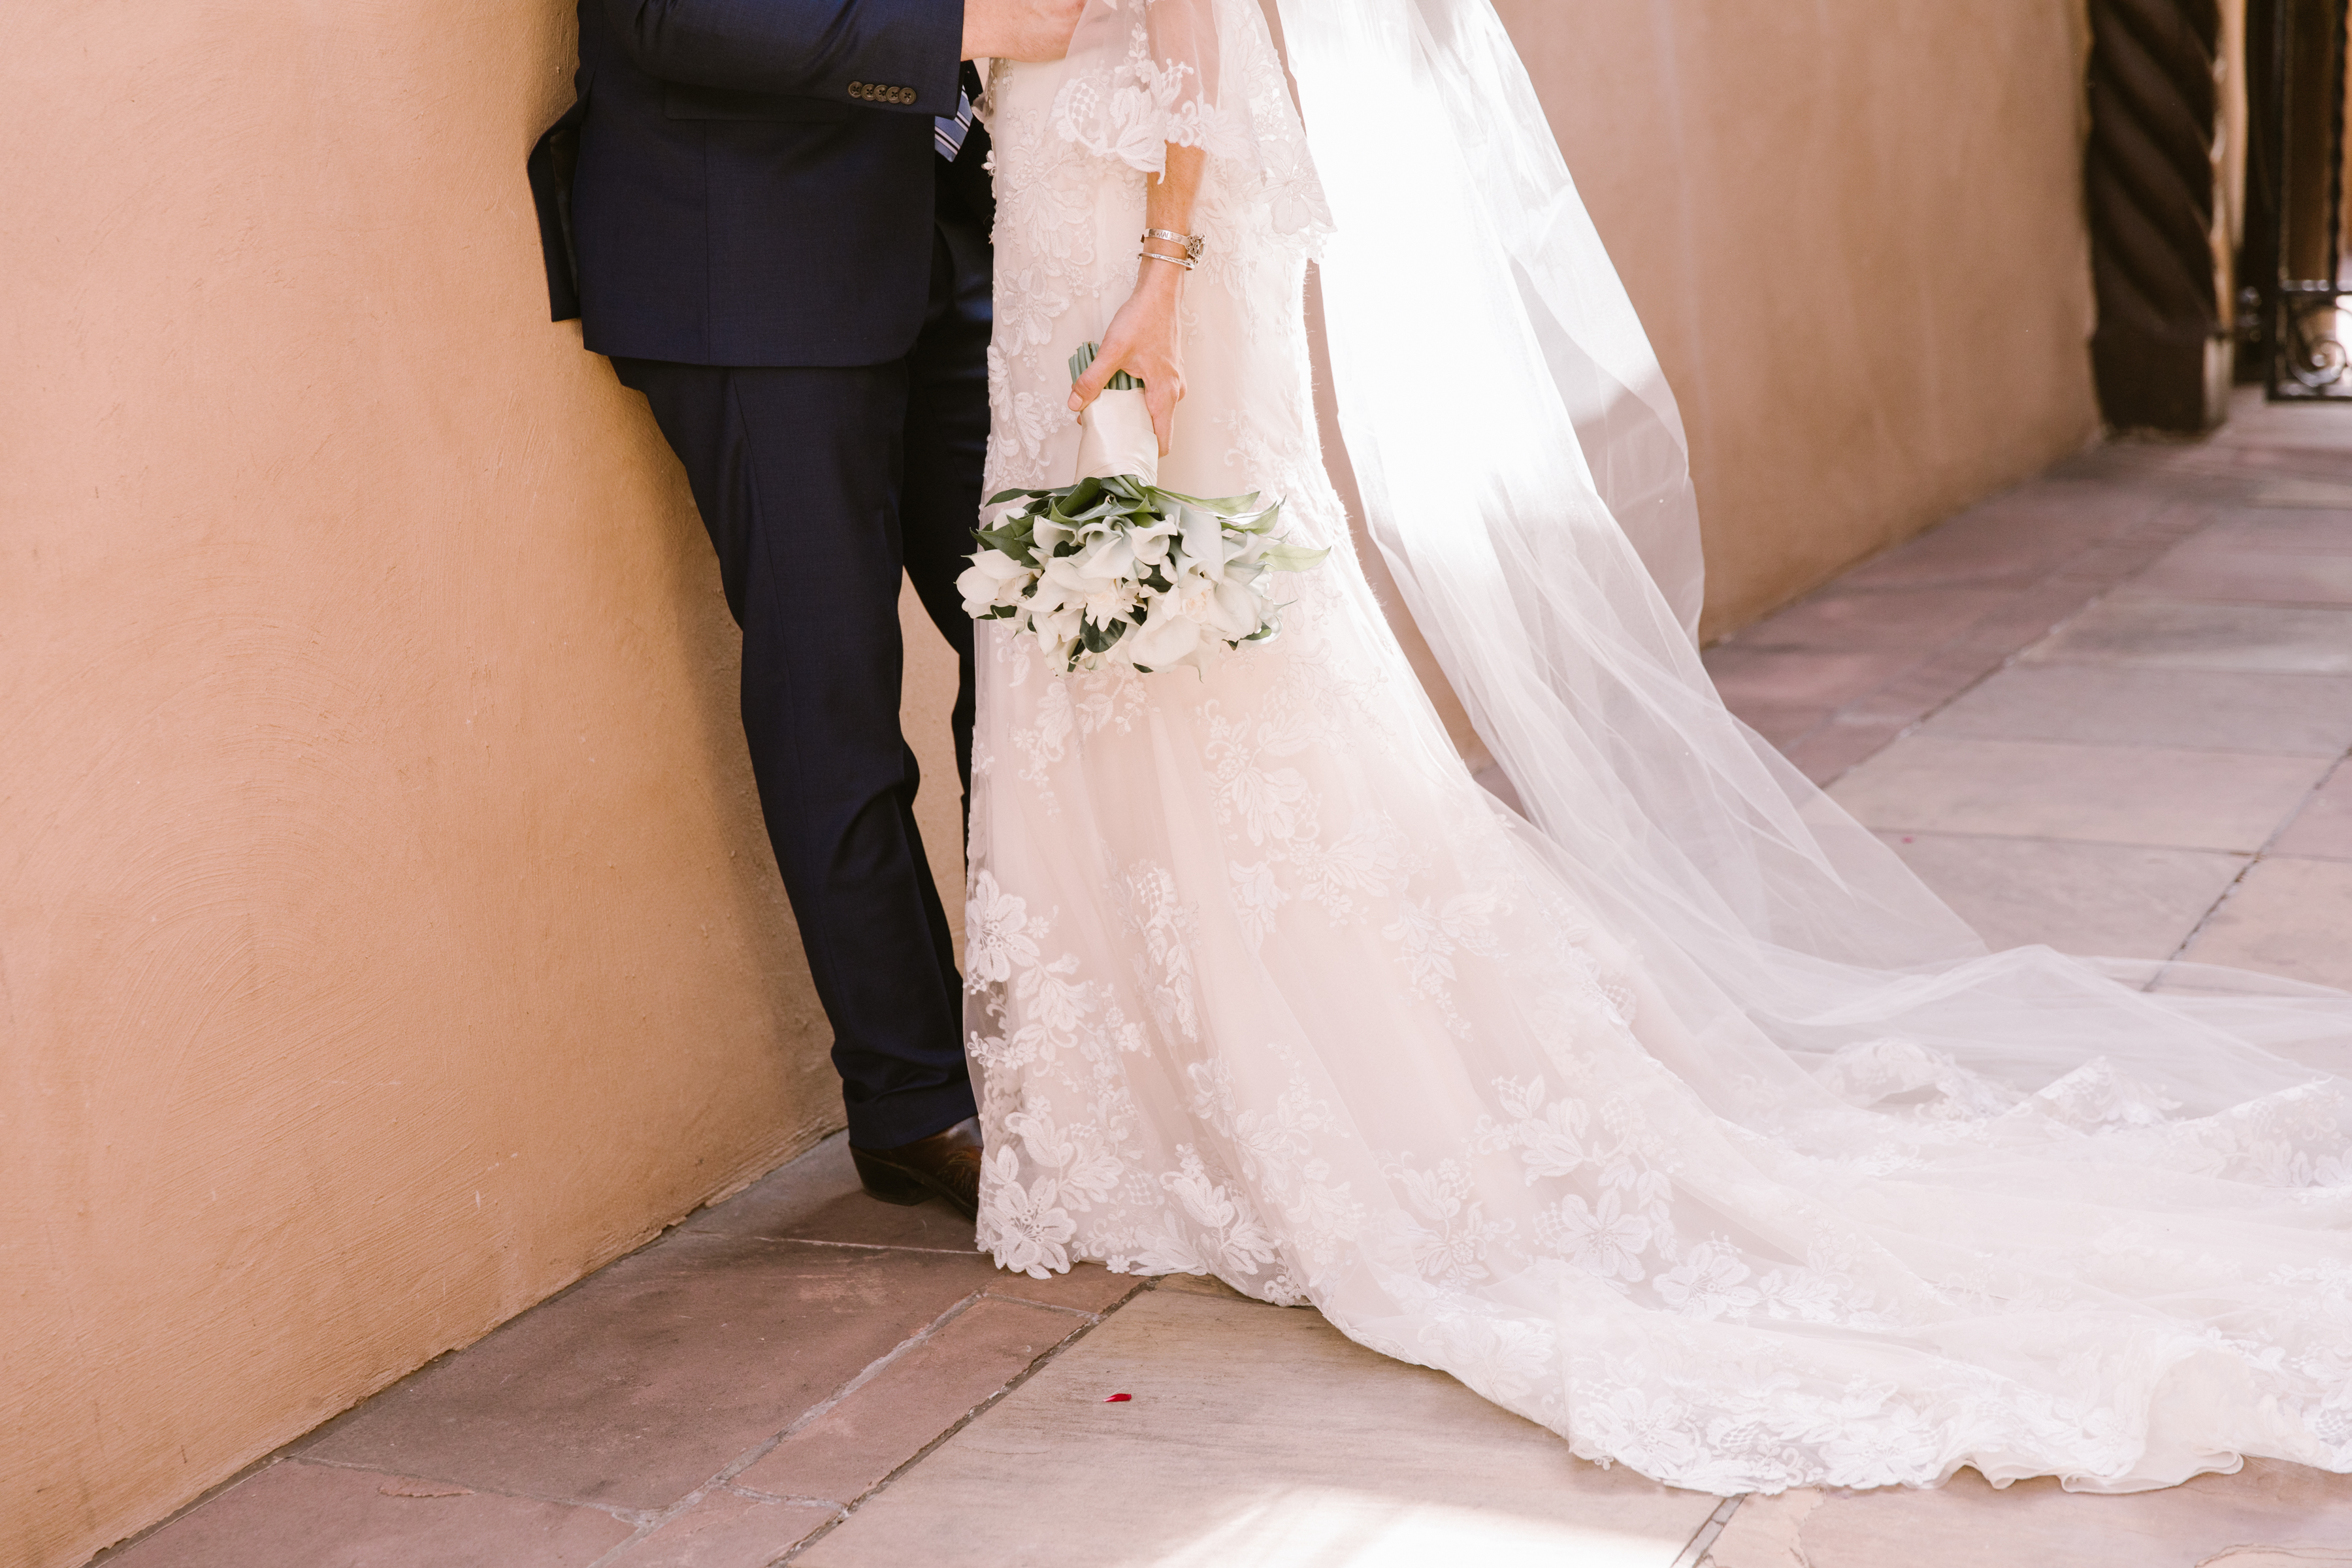 New Mexico wedding Santa Fe planning La Fonda gown suit inspiration design floral bouquet lace photography romantic styled local perfect wedding guide